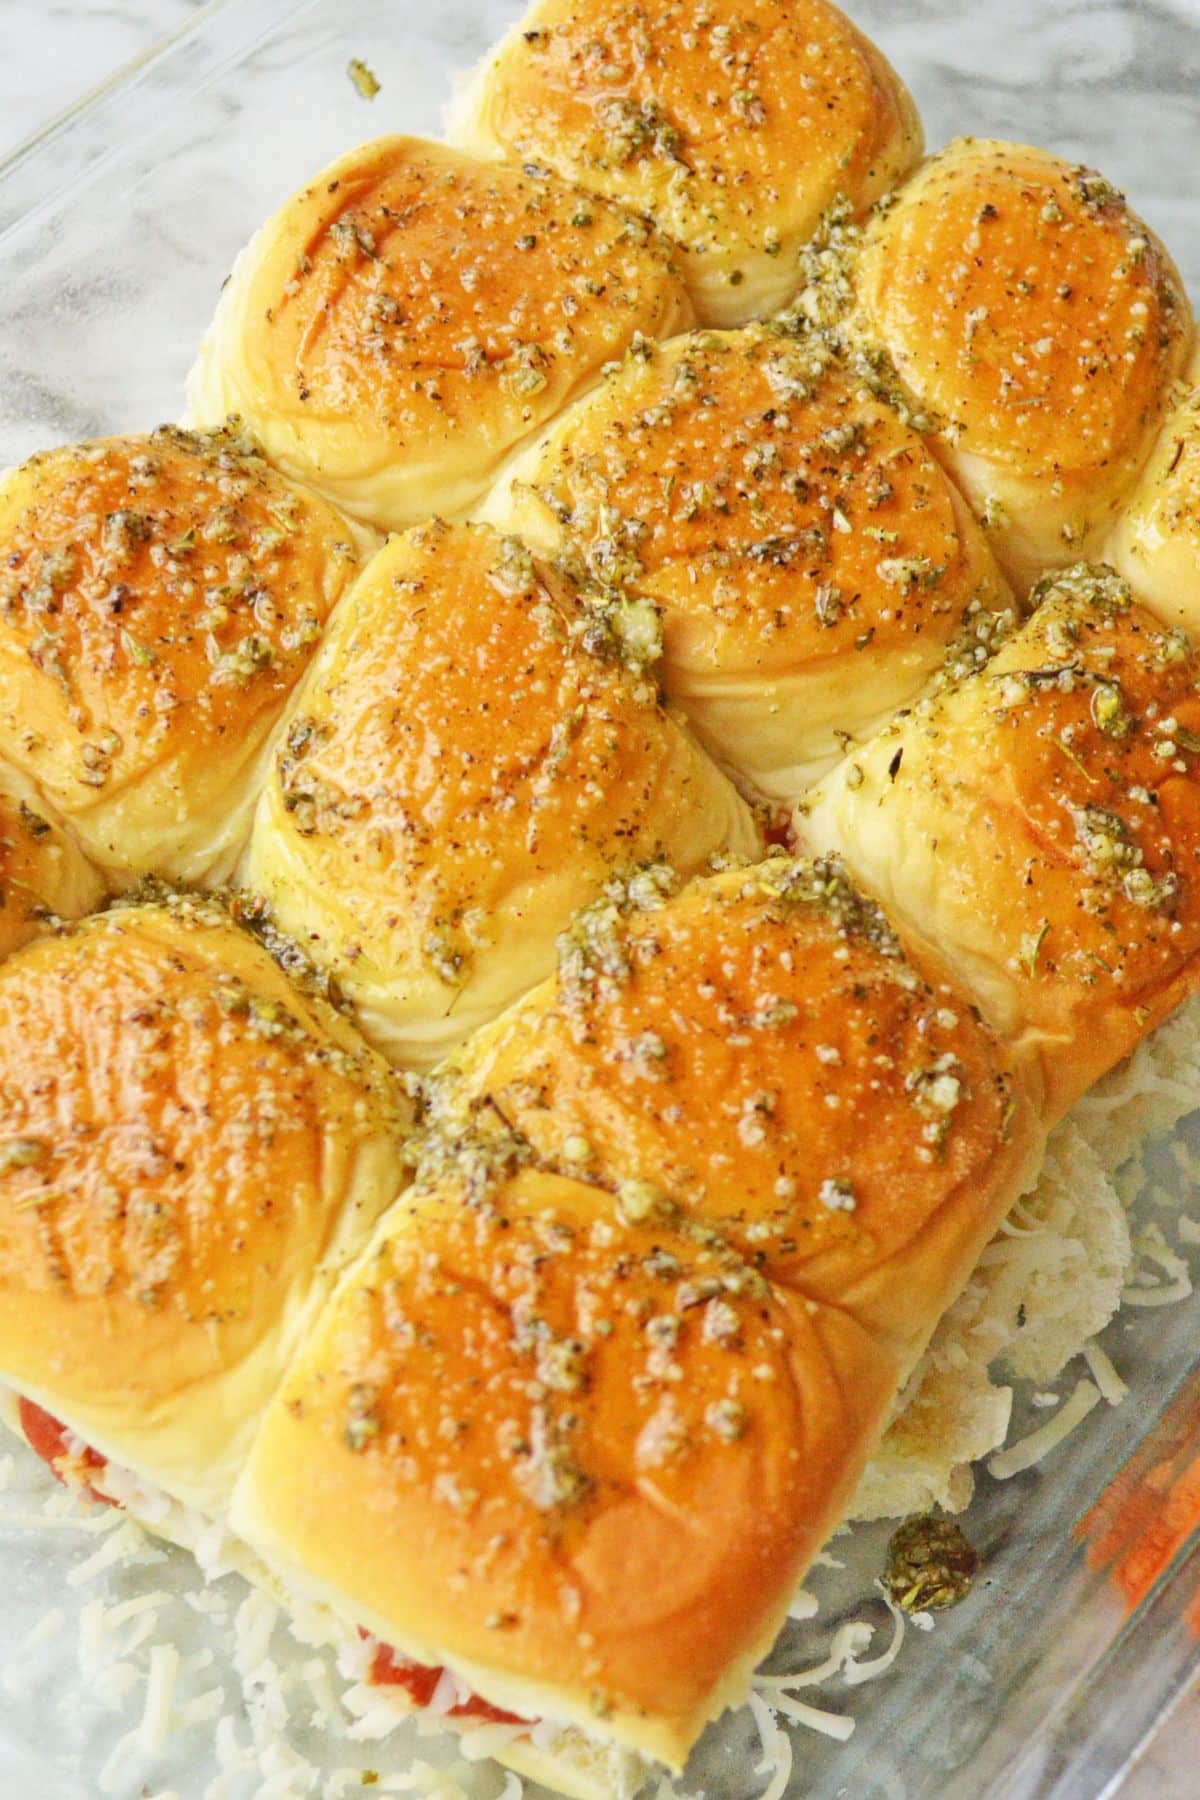 top of rolls with meatballs inside and parmesan cheese on top